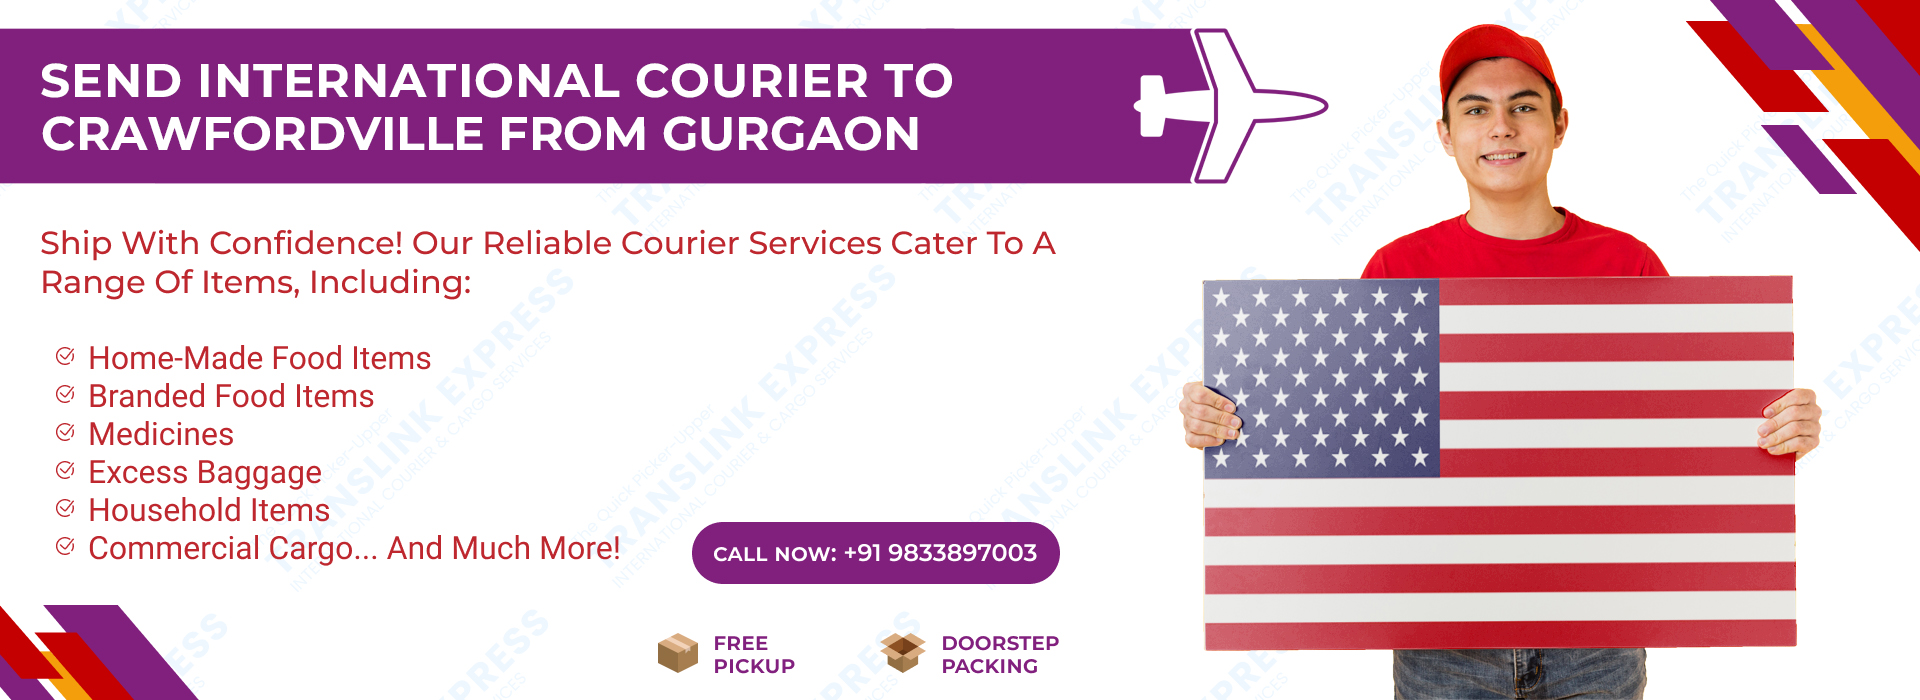 Courier to Crawfordville From Gurgaon